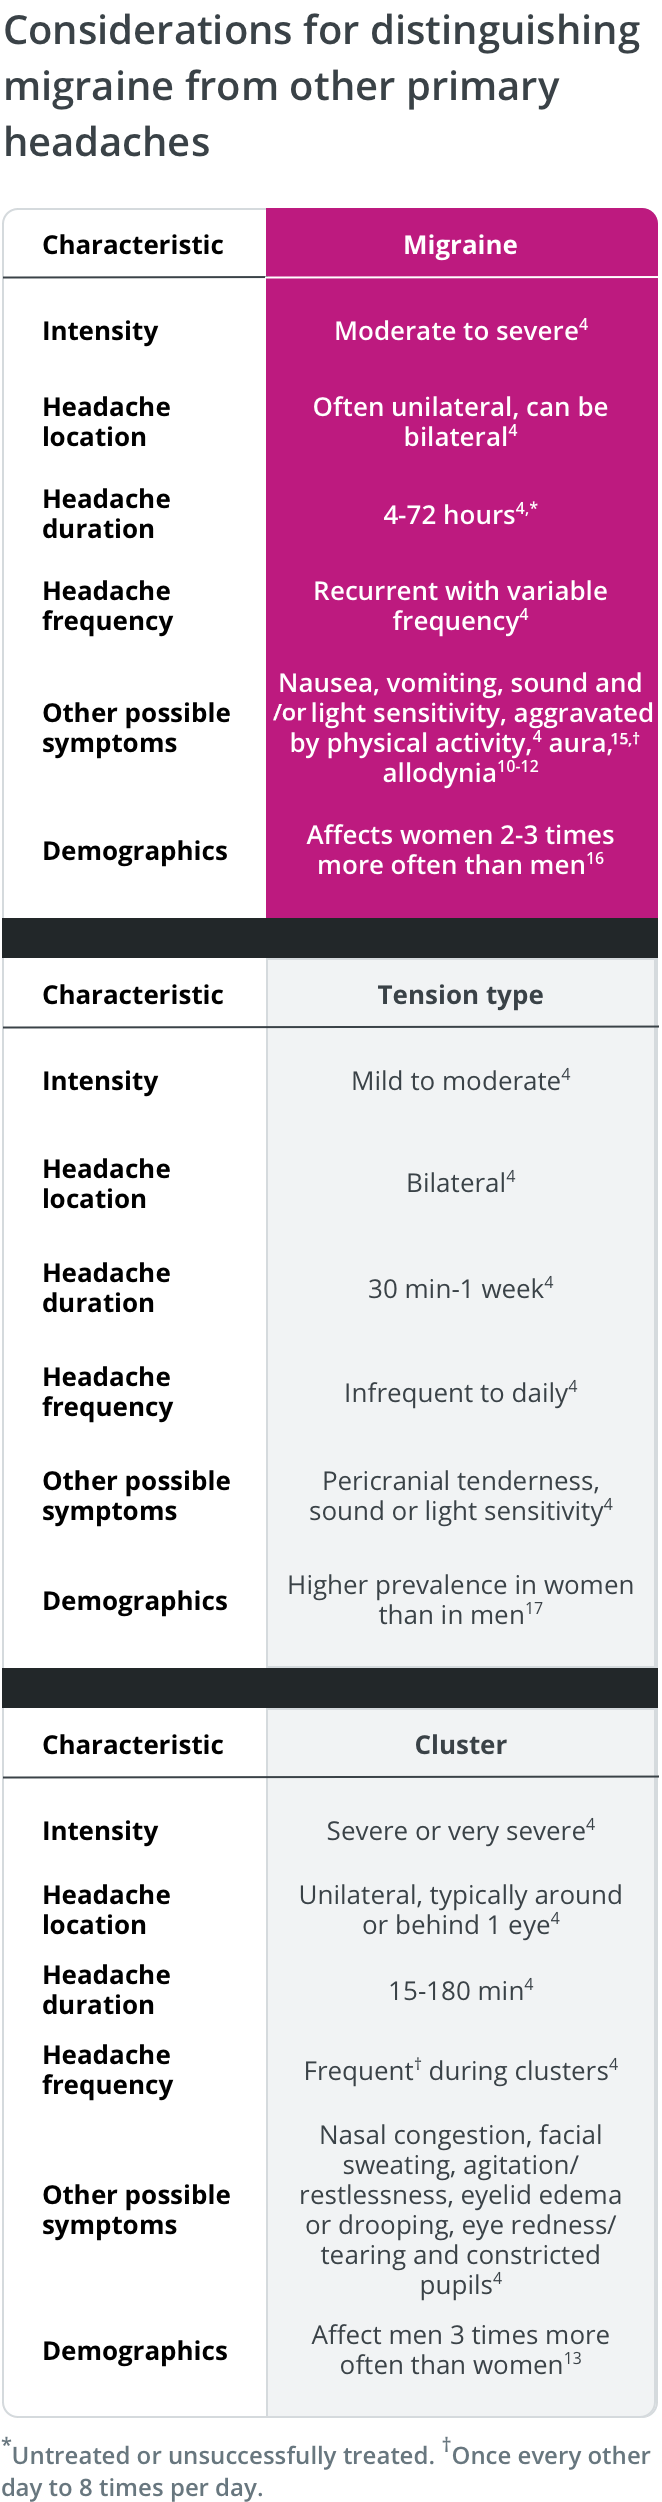 Criteria for distinguishing migraine from other primary headaches